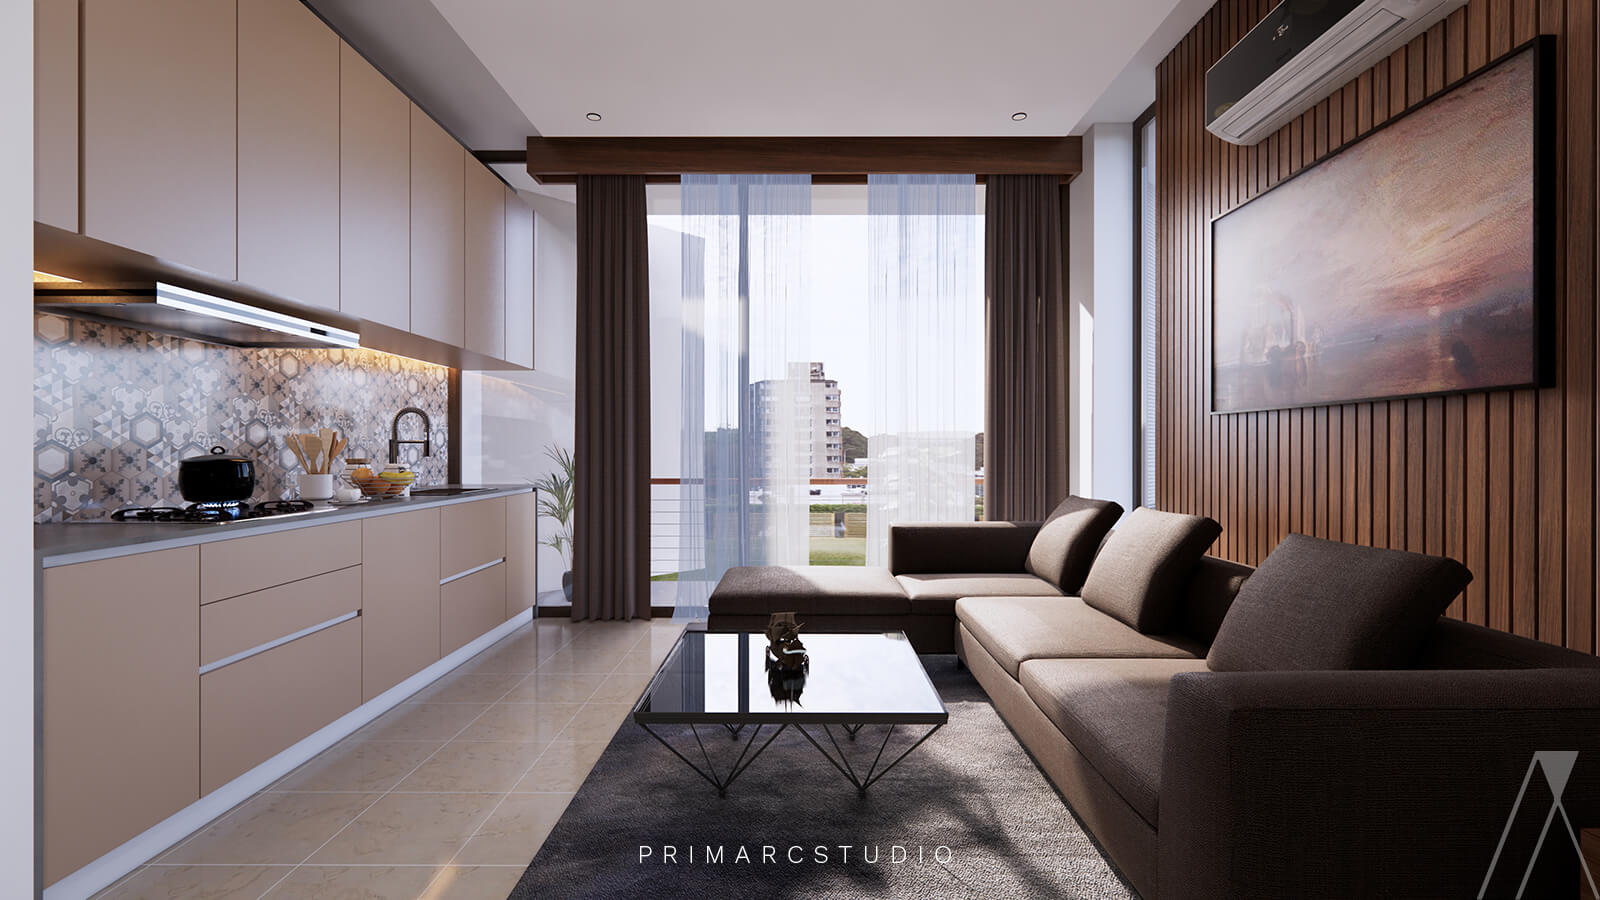 Kitchen and lounge design for the apartments